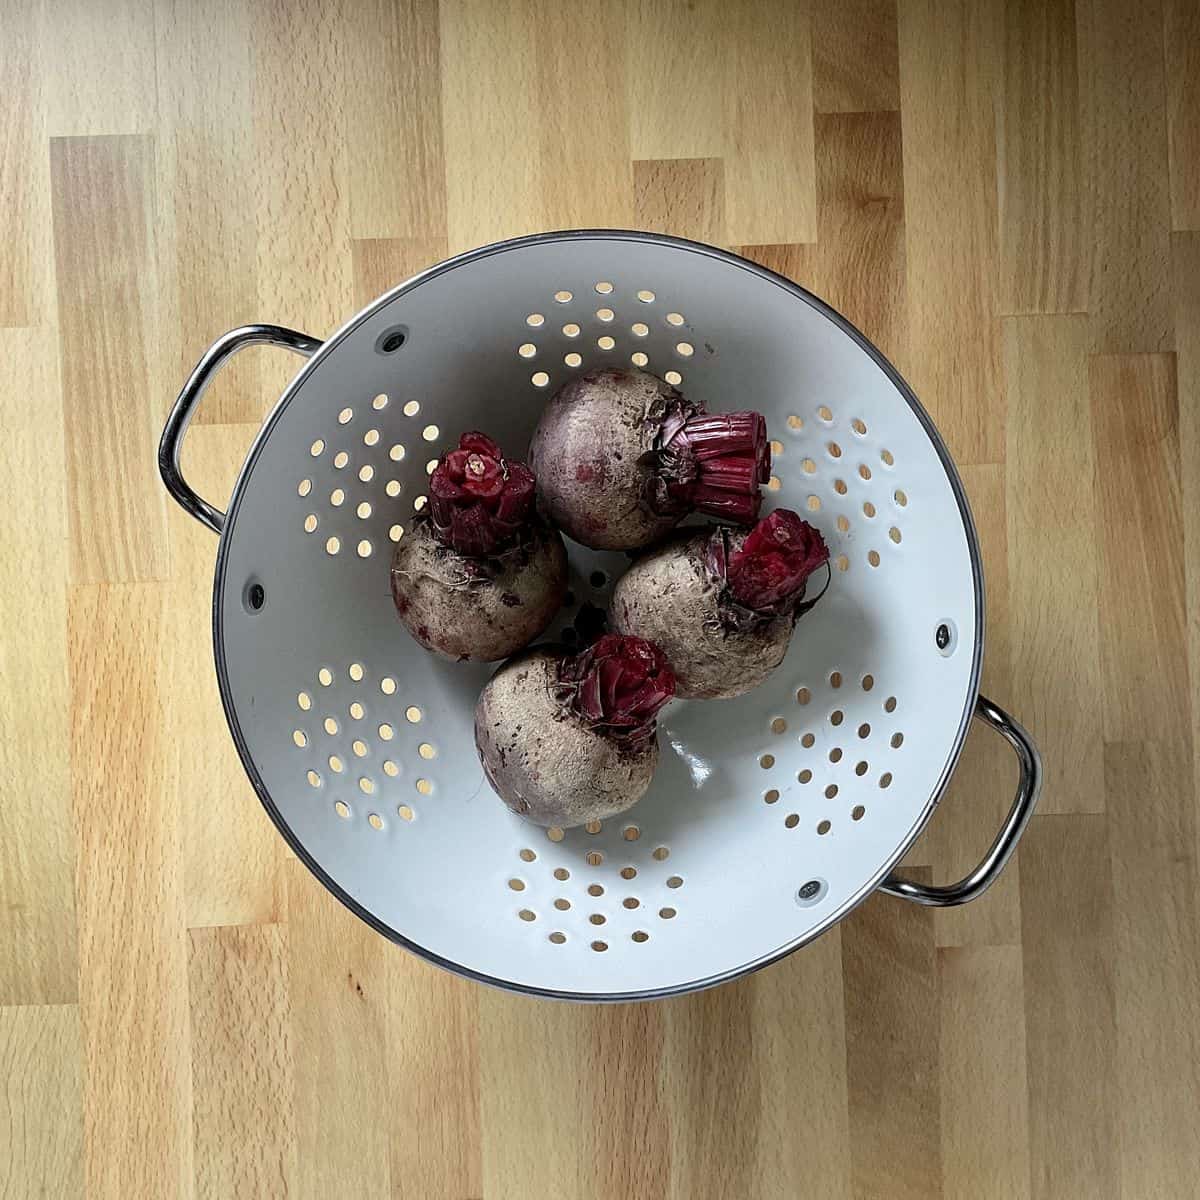 Clean and trimmed beets in a colander.